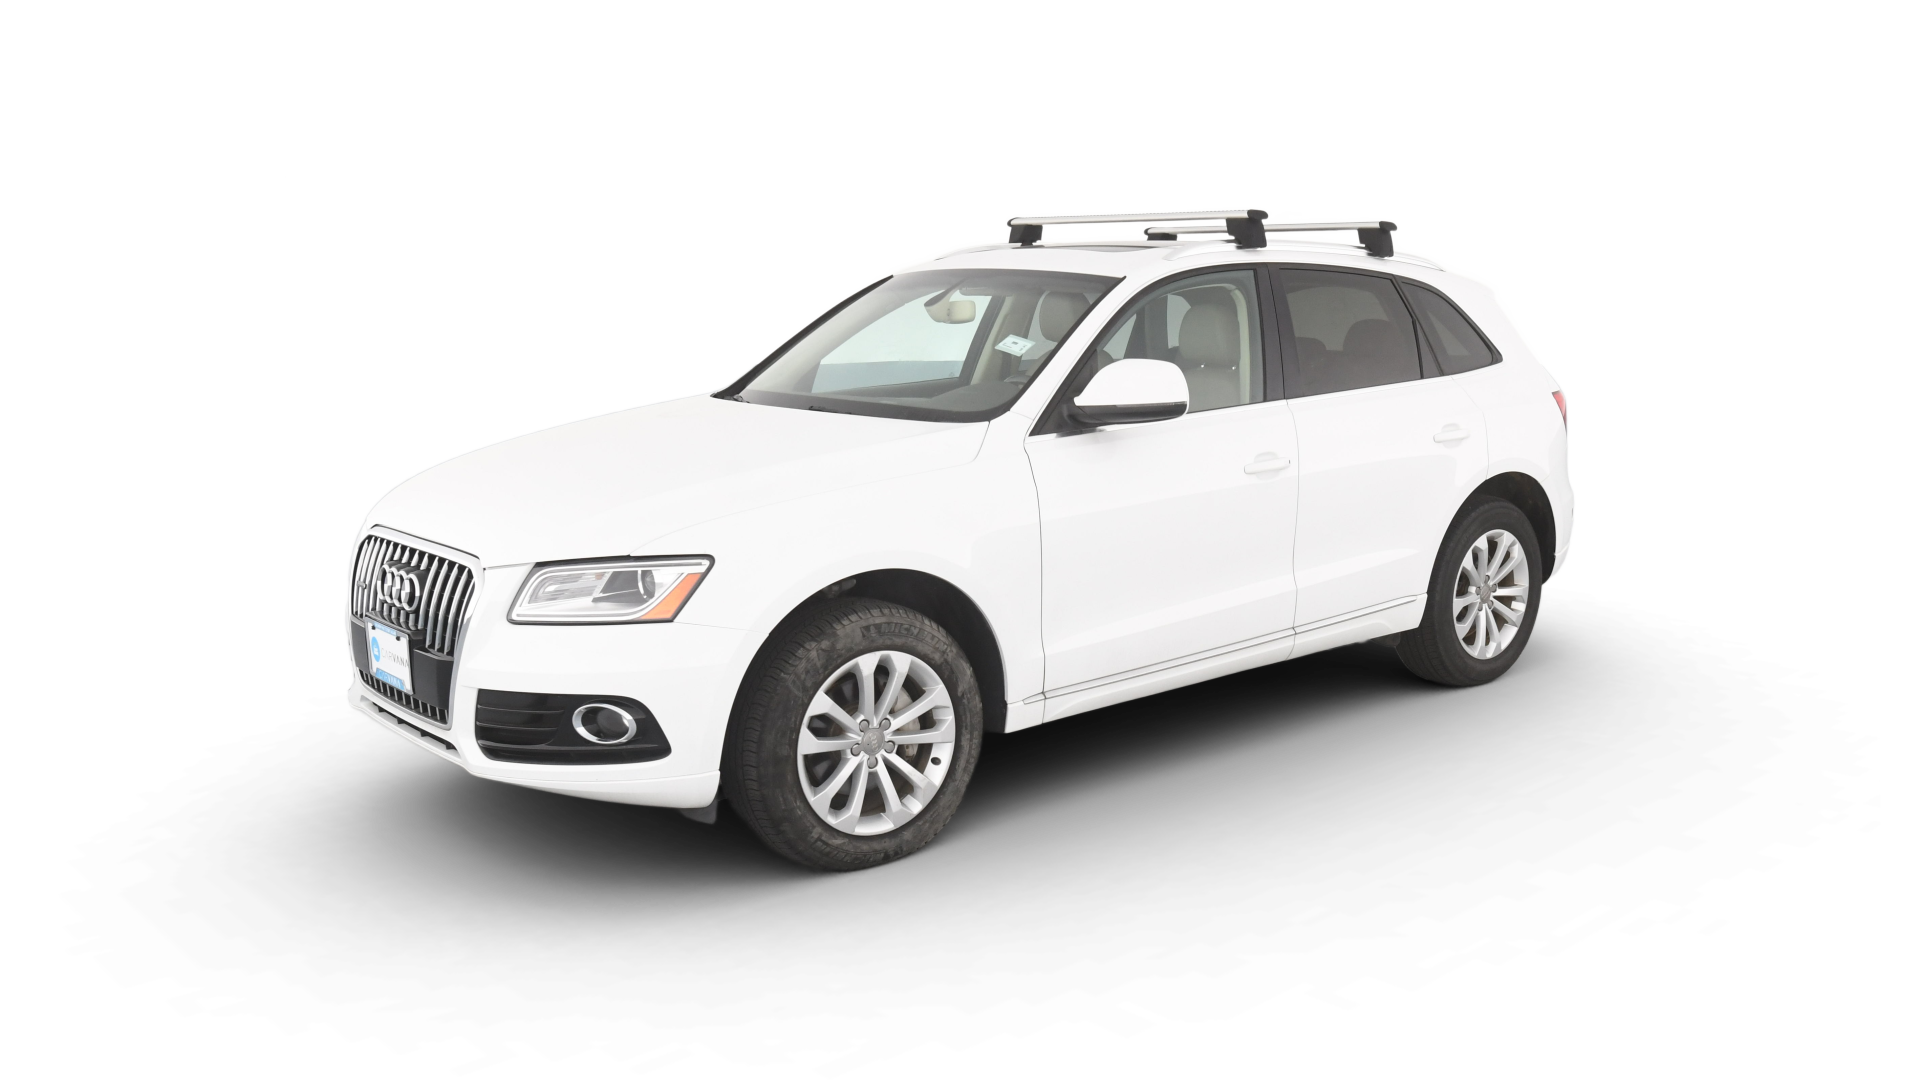 Used 2013 Audi Q5 For Sale Online | Carvana